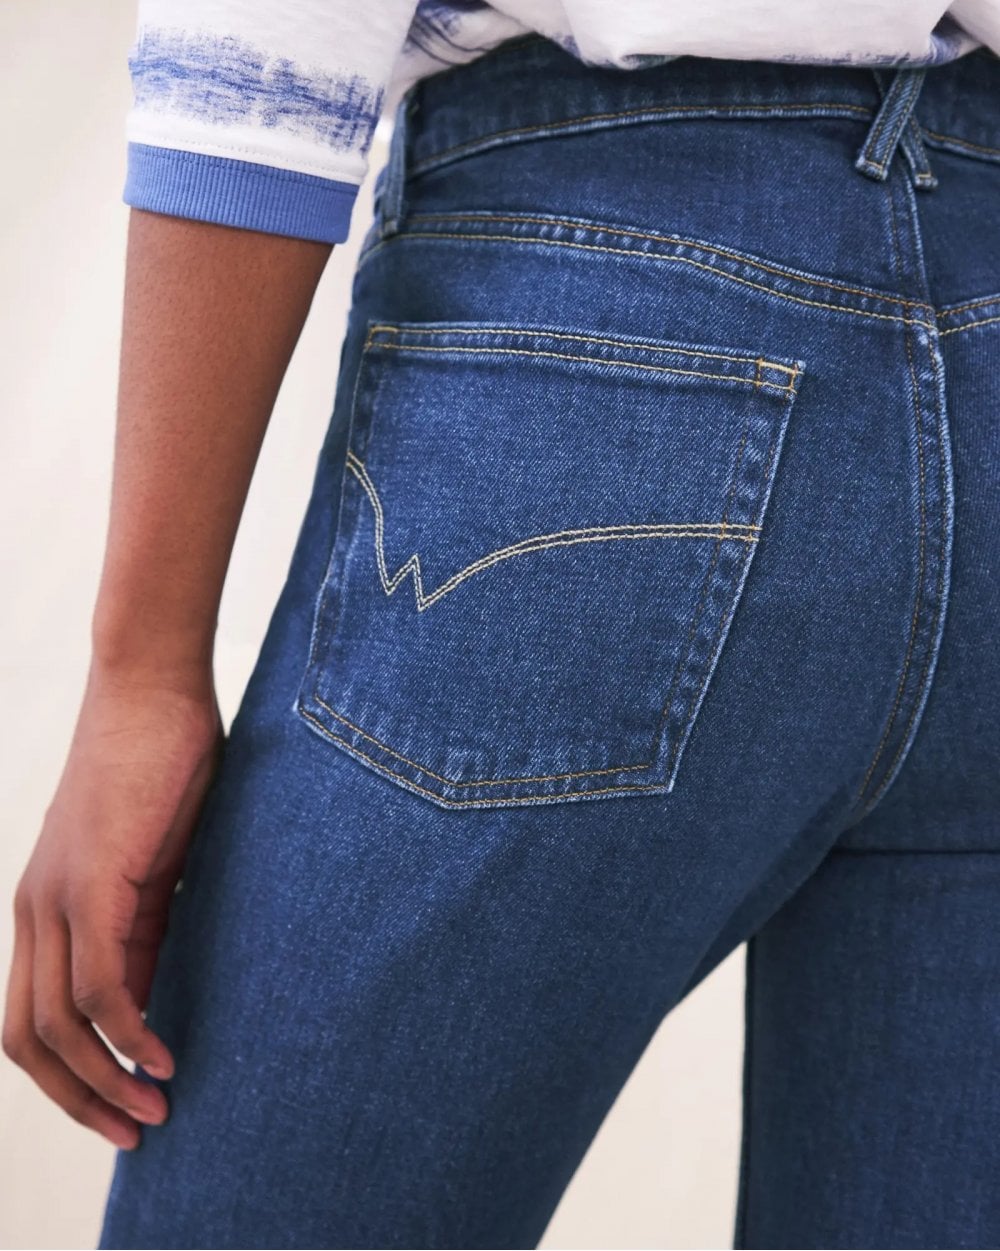 Katy Relaxed Slim Jeans